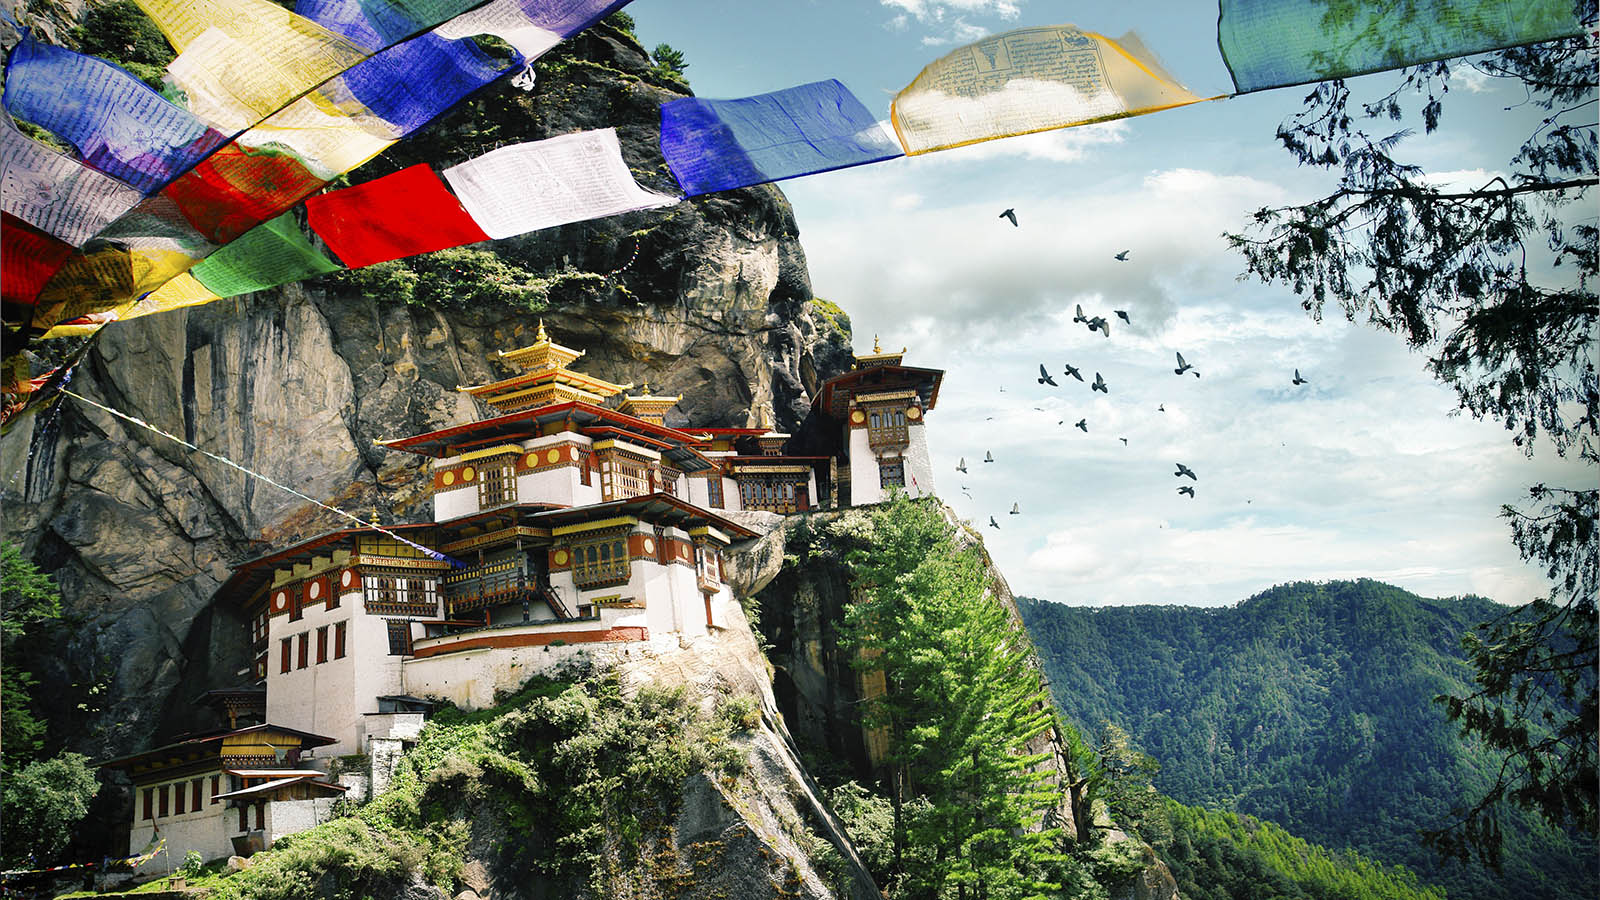 There Are 48 Countries in Asia, It’d Shock Me If You Know Even Half the Capitals Tiger's Nest Monastery, Bhutan